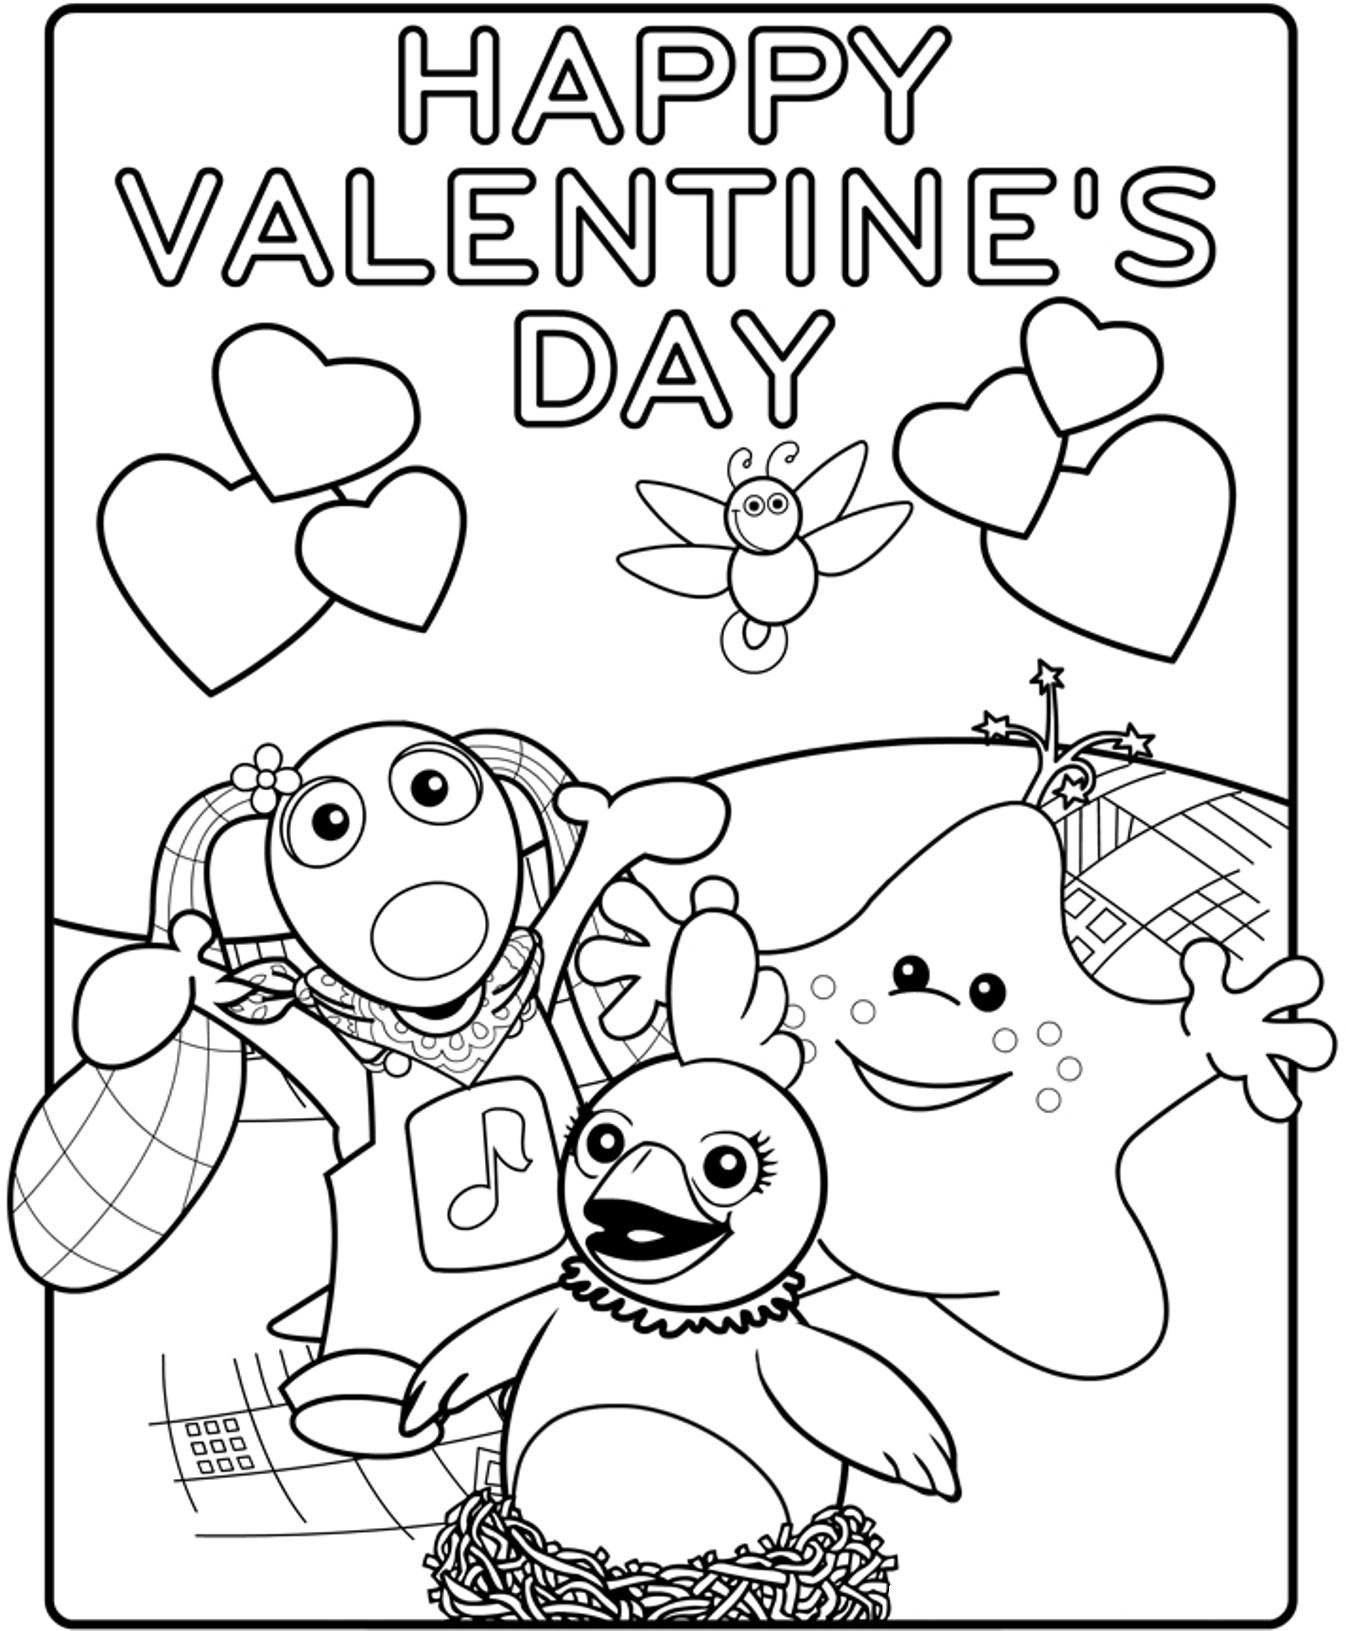 Download Printable Valentines Day Cards - Best Coloring Pages For Kids